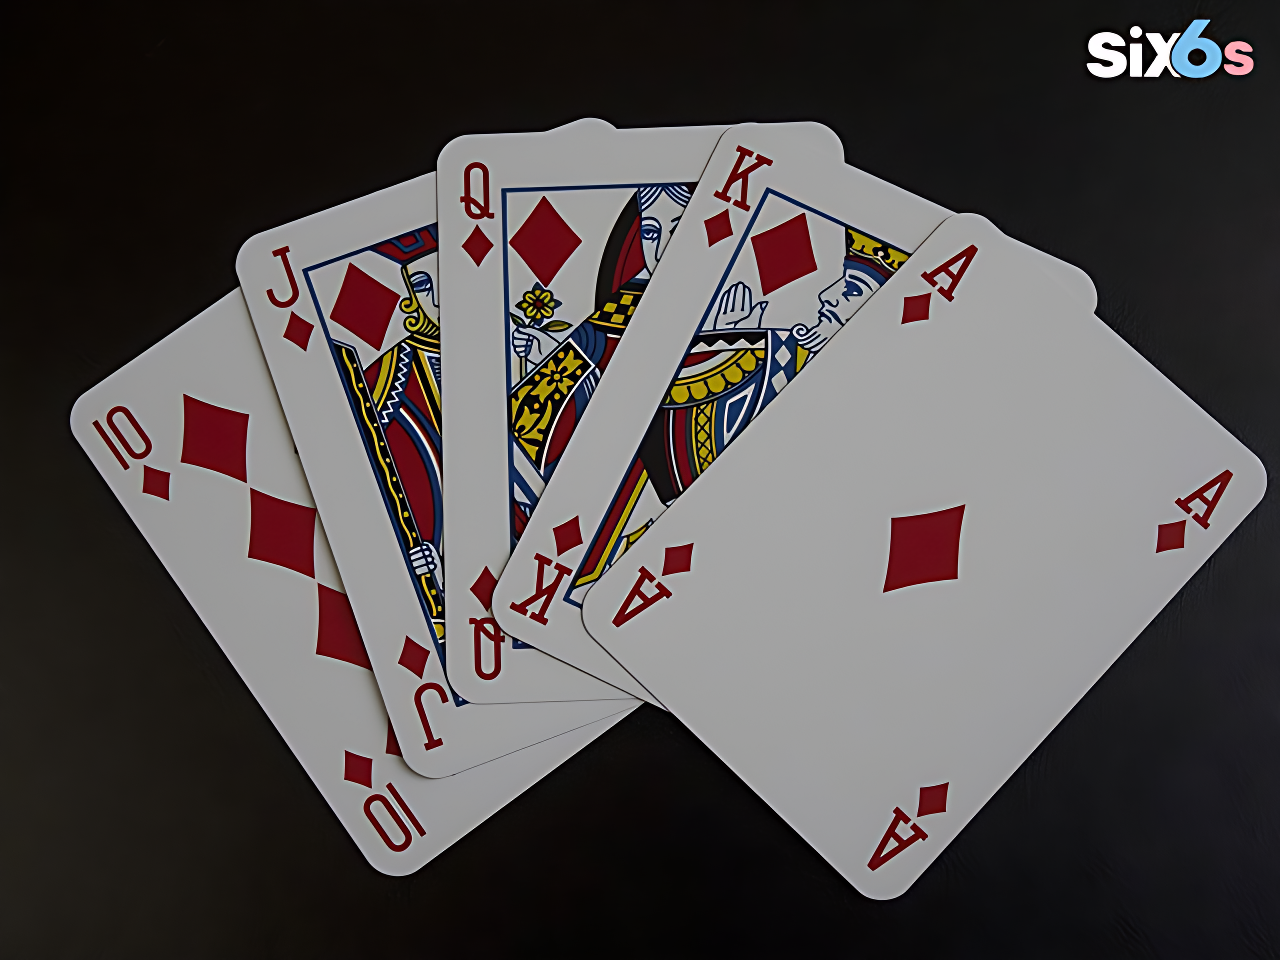 cards on the table for explaining Live Teen Patti betting at six6s